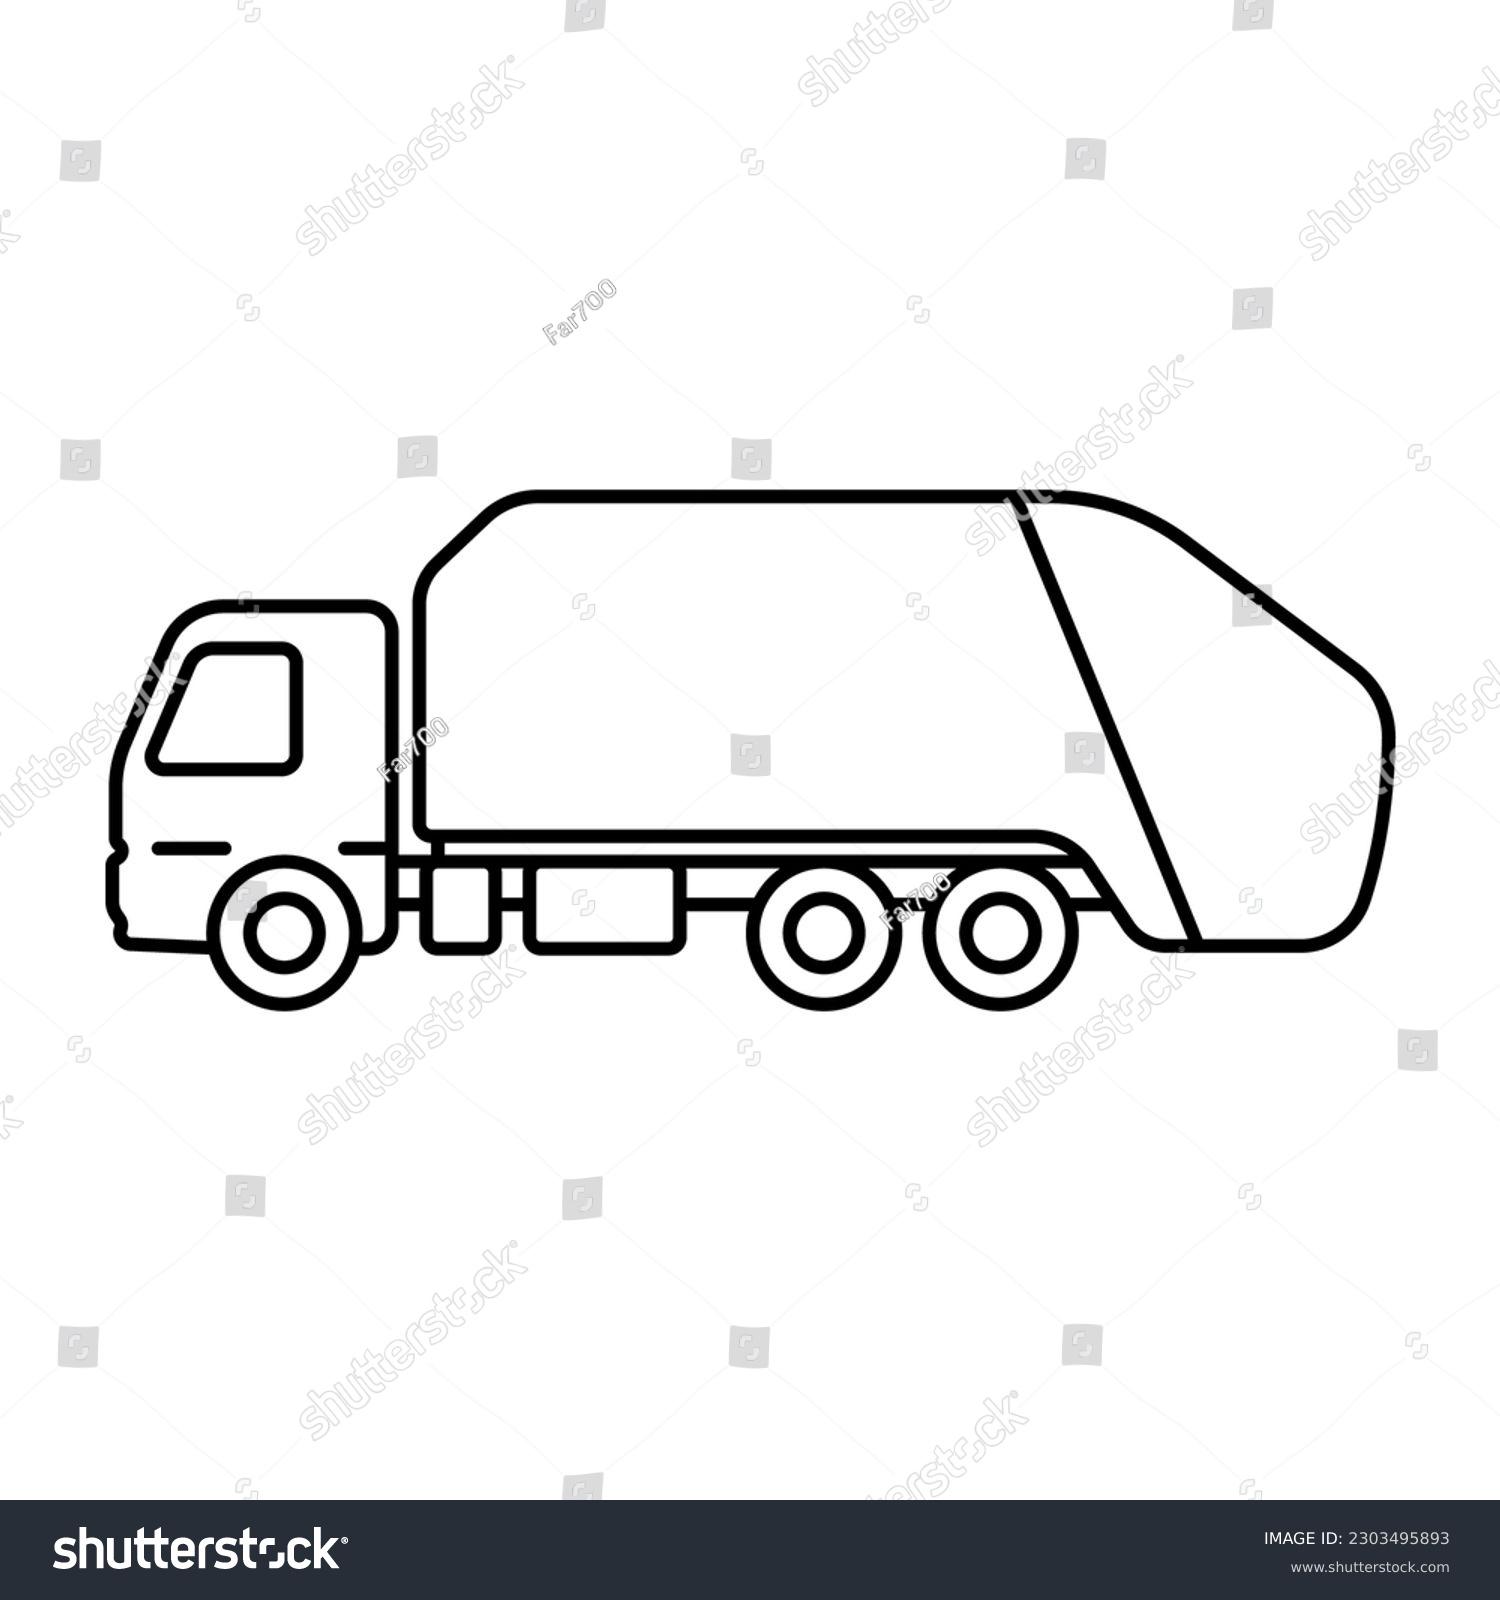 SVG of Garbage truck icon. Black contour linear silhouette. Side view. Editable strokes. Vector simple flat graphic illustration. Isolated object on a white background. Isolate. svg